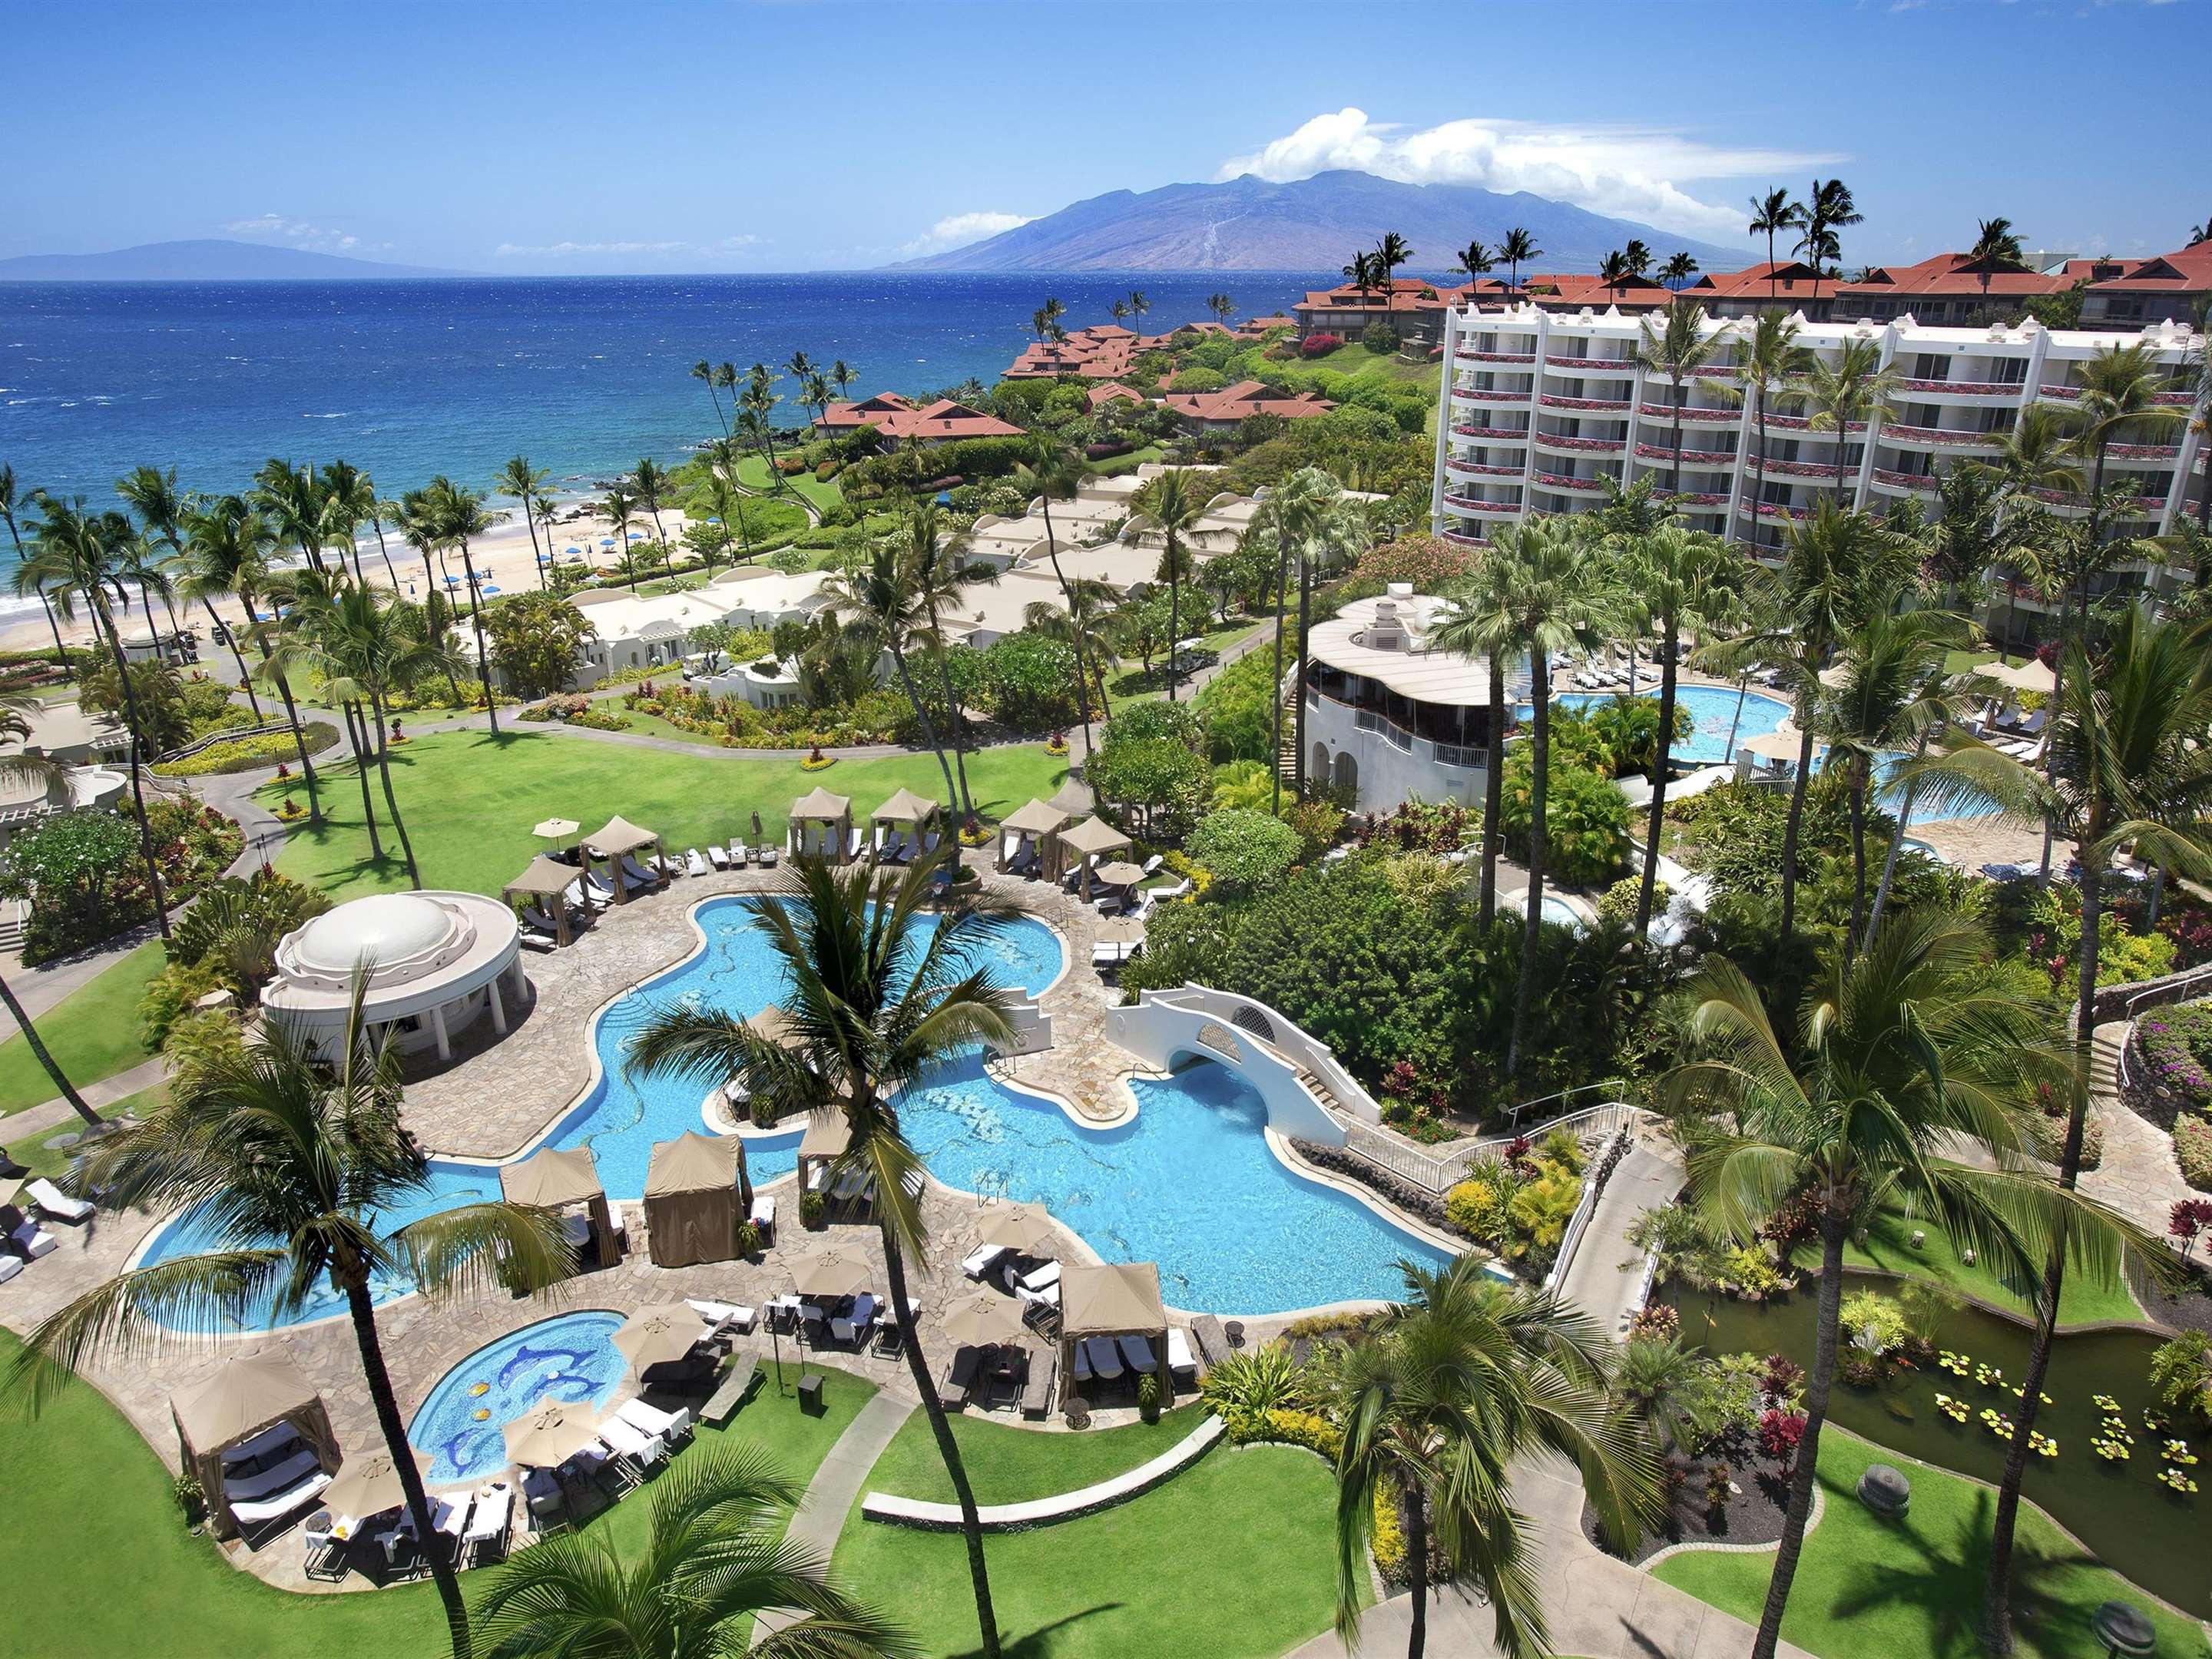 Maui Hotels: Compare Hotels in Maui from $67/night on KAYAK